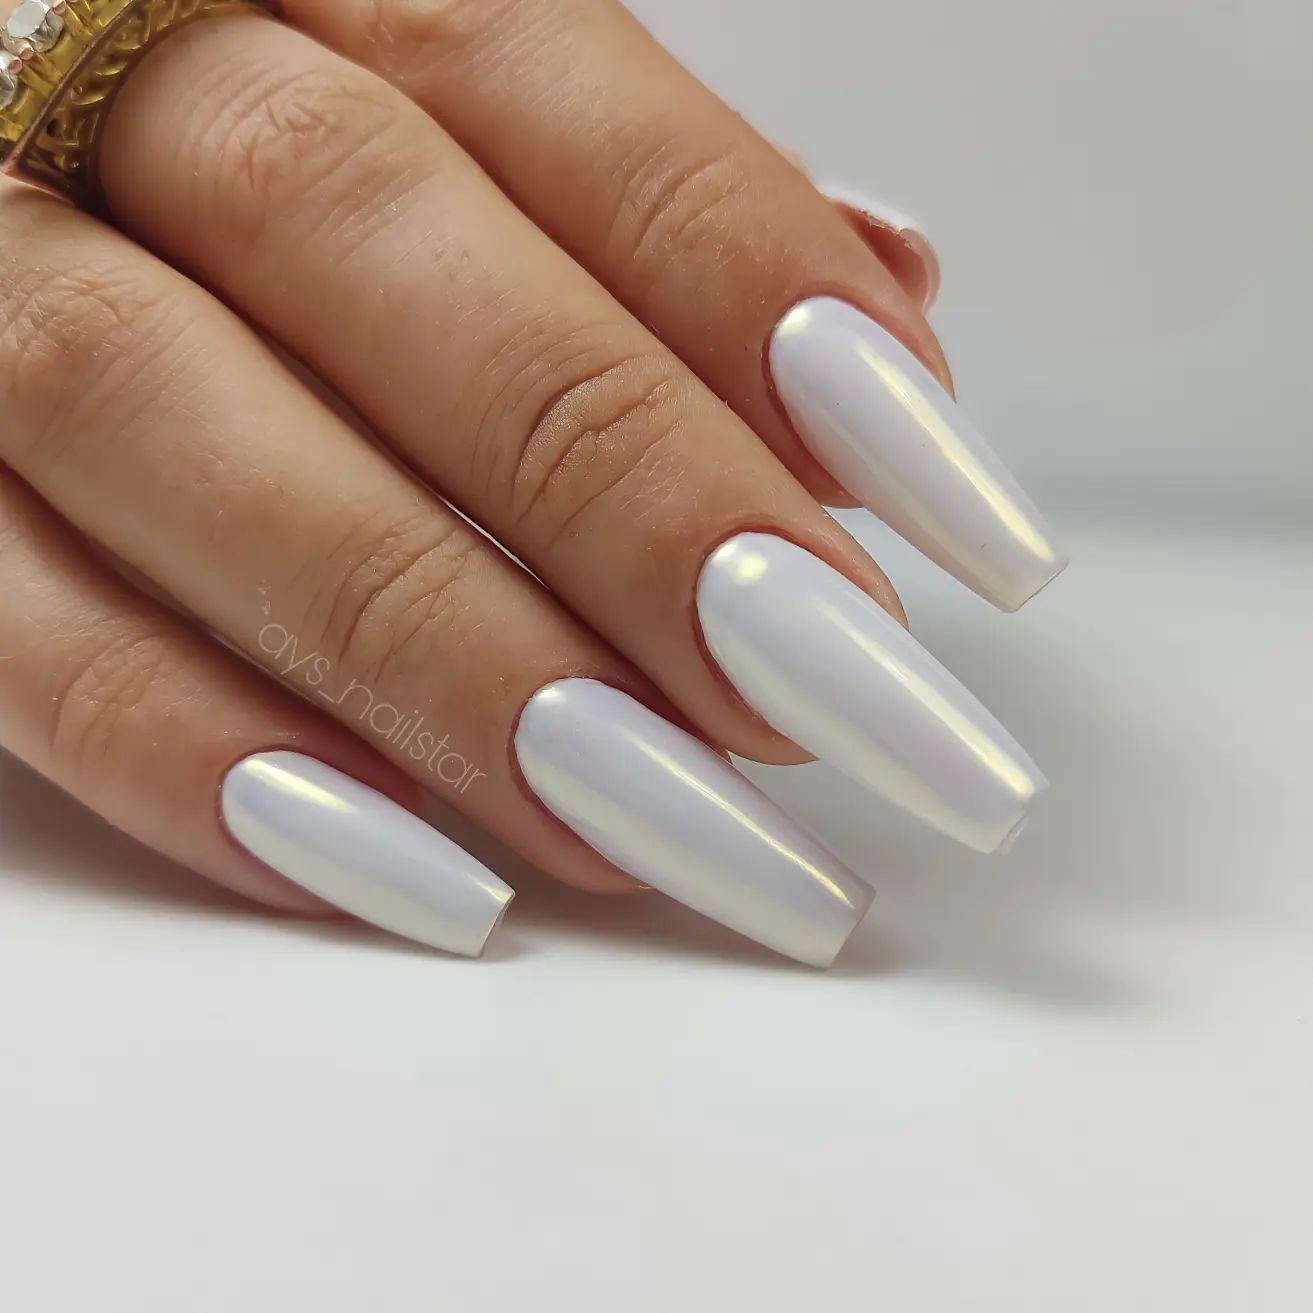 Being one of the most iconic chrome designs, Hailey Bieber nails offer a gorgeous look. With its light effect, these white chrome nails will make you stand out more in your wedding.